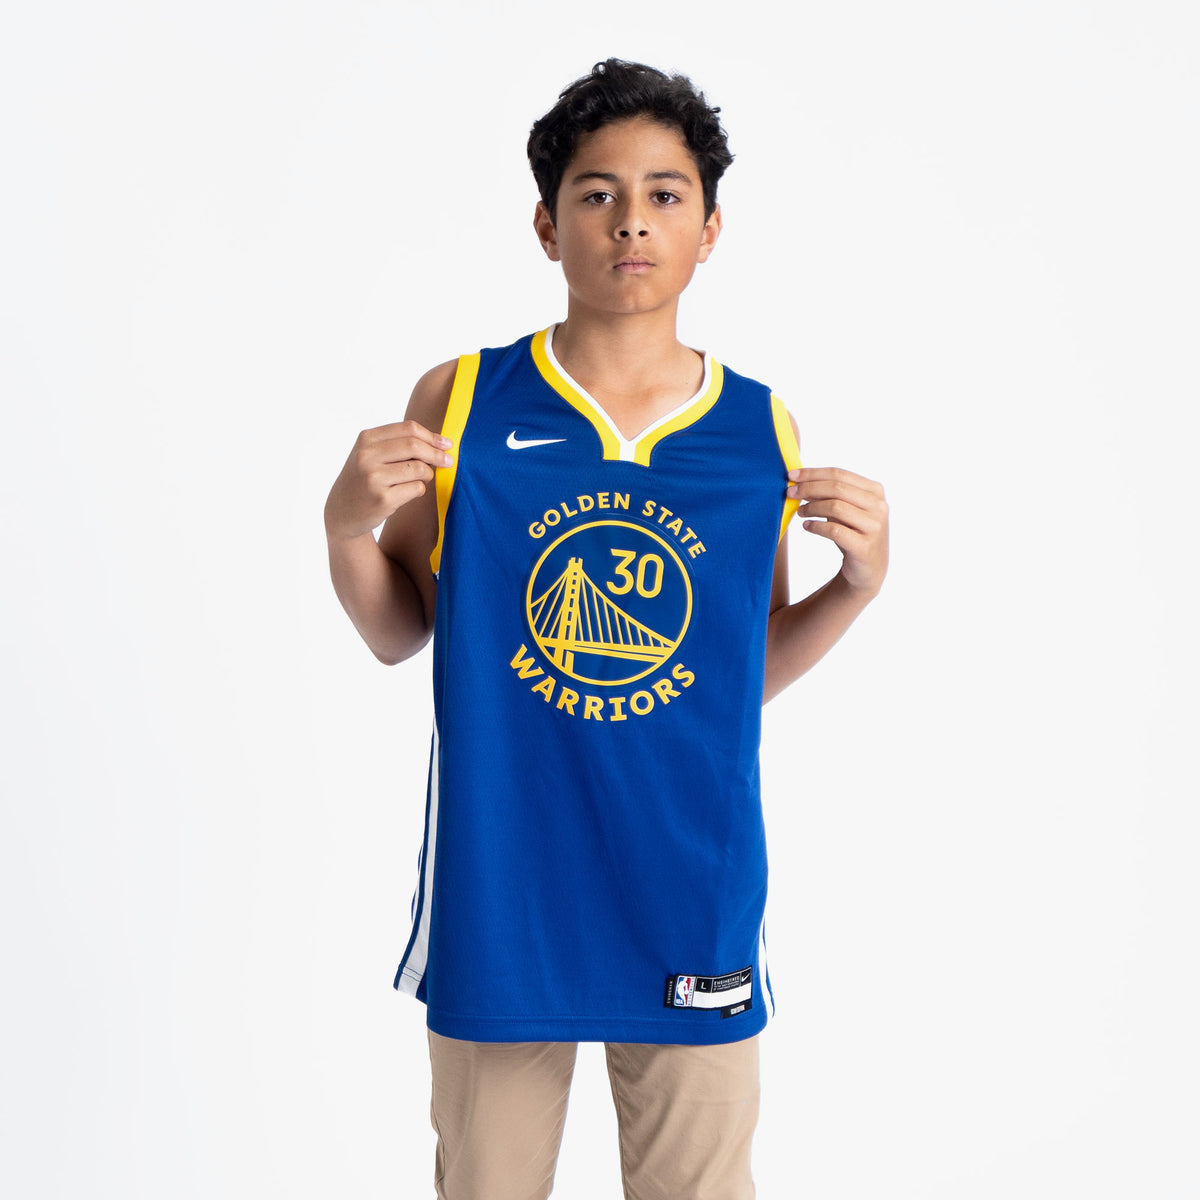 Pin by Sy James on Curry  Nba stephen curry, Nba swingman jersey